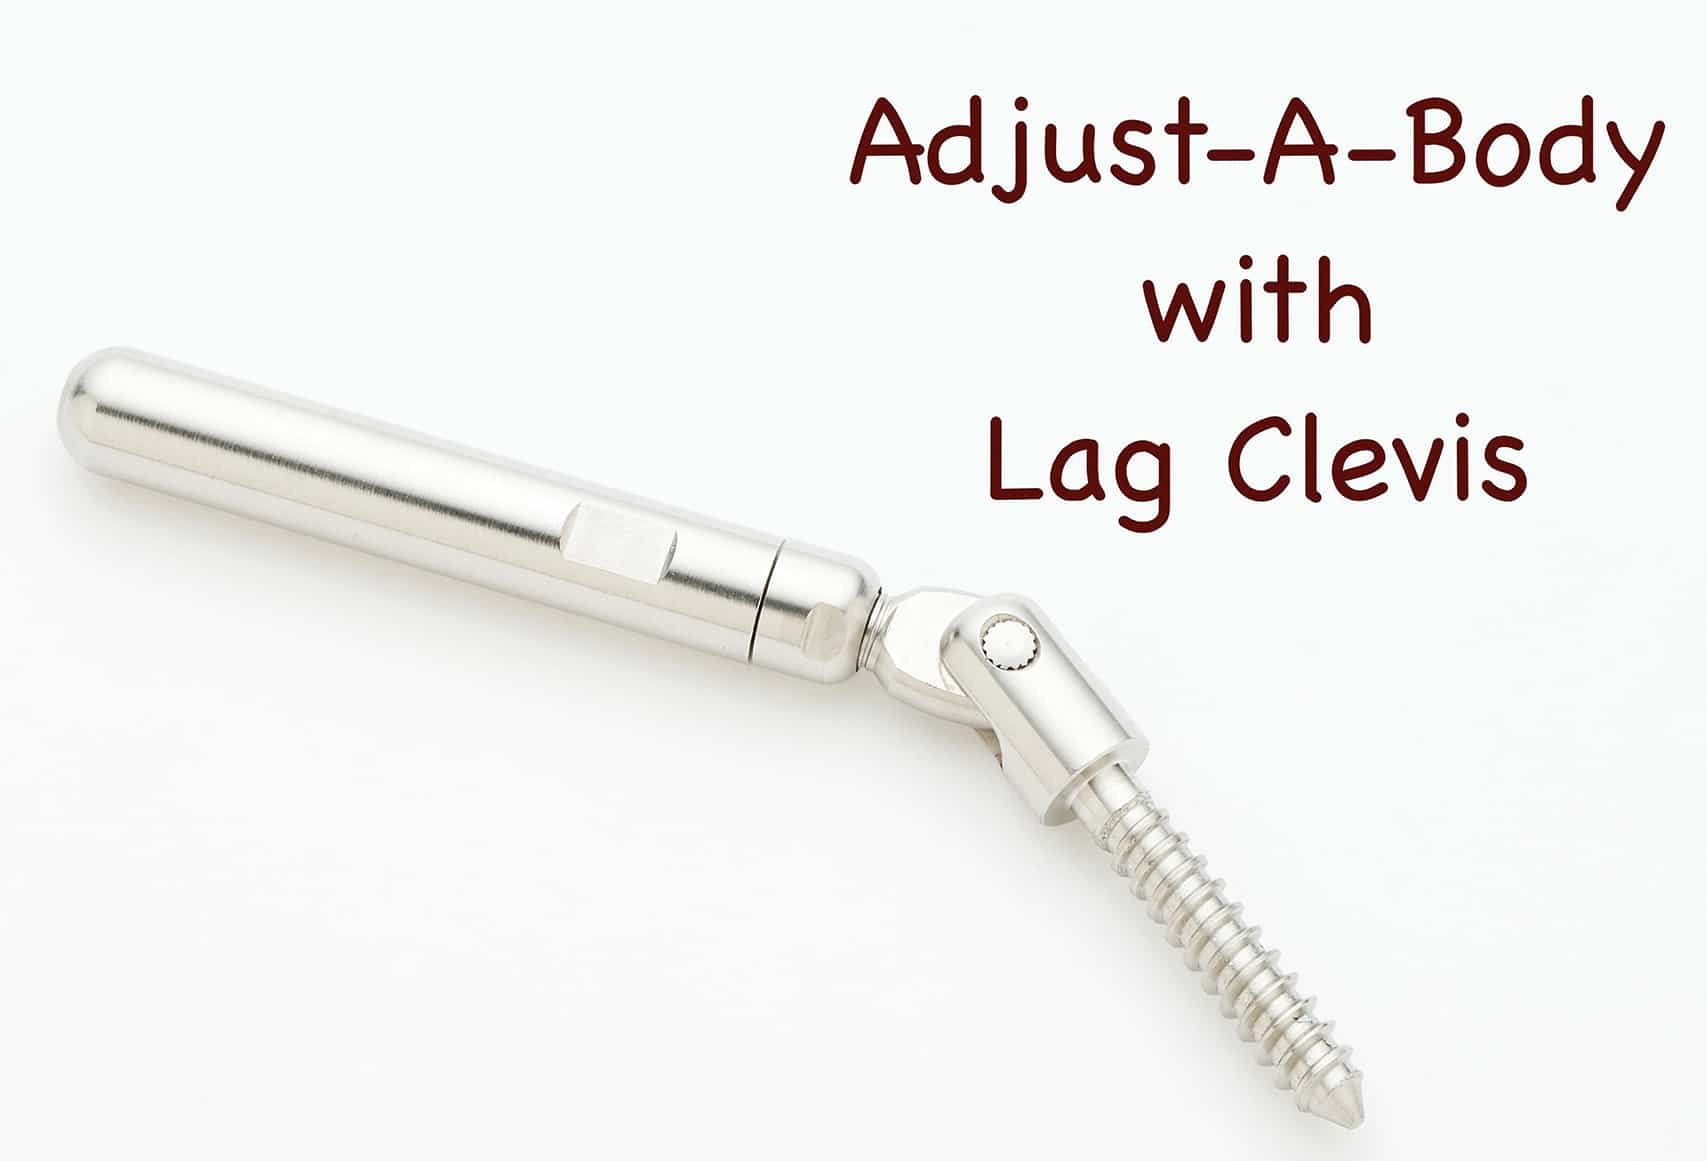 adjust-a-body with lag clevis